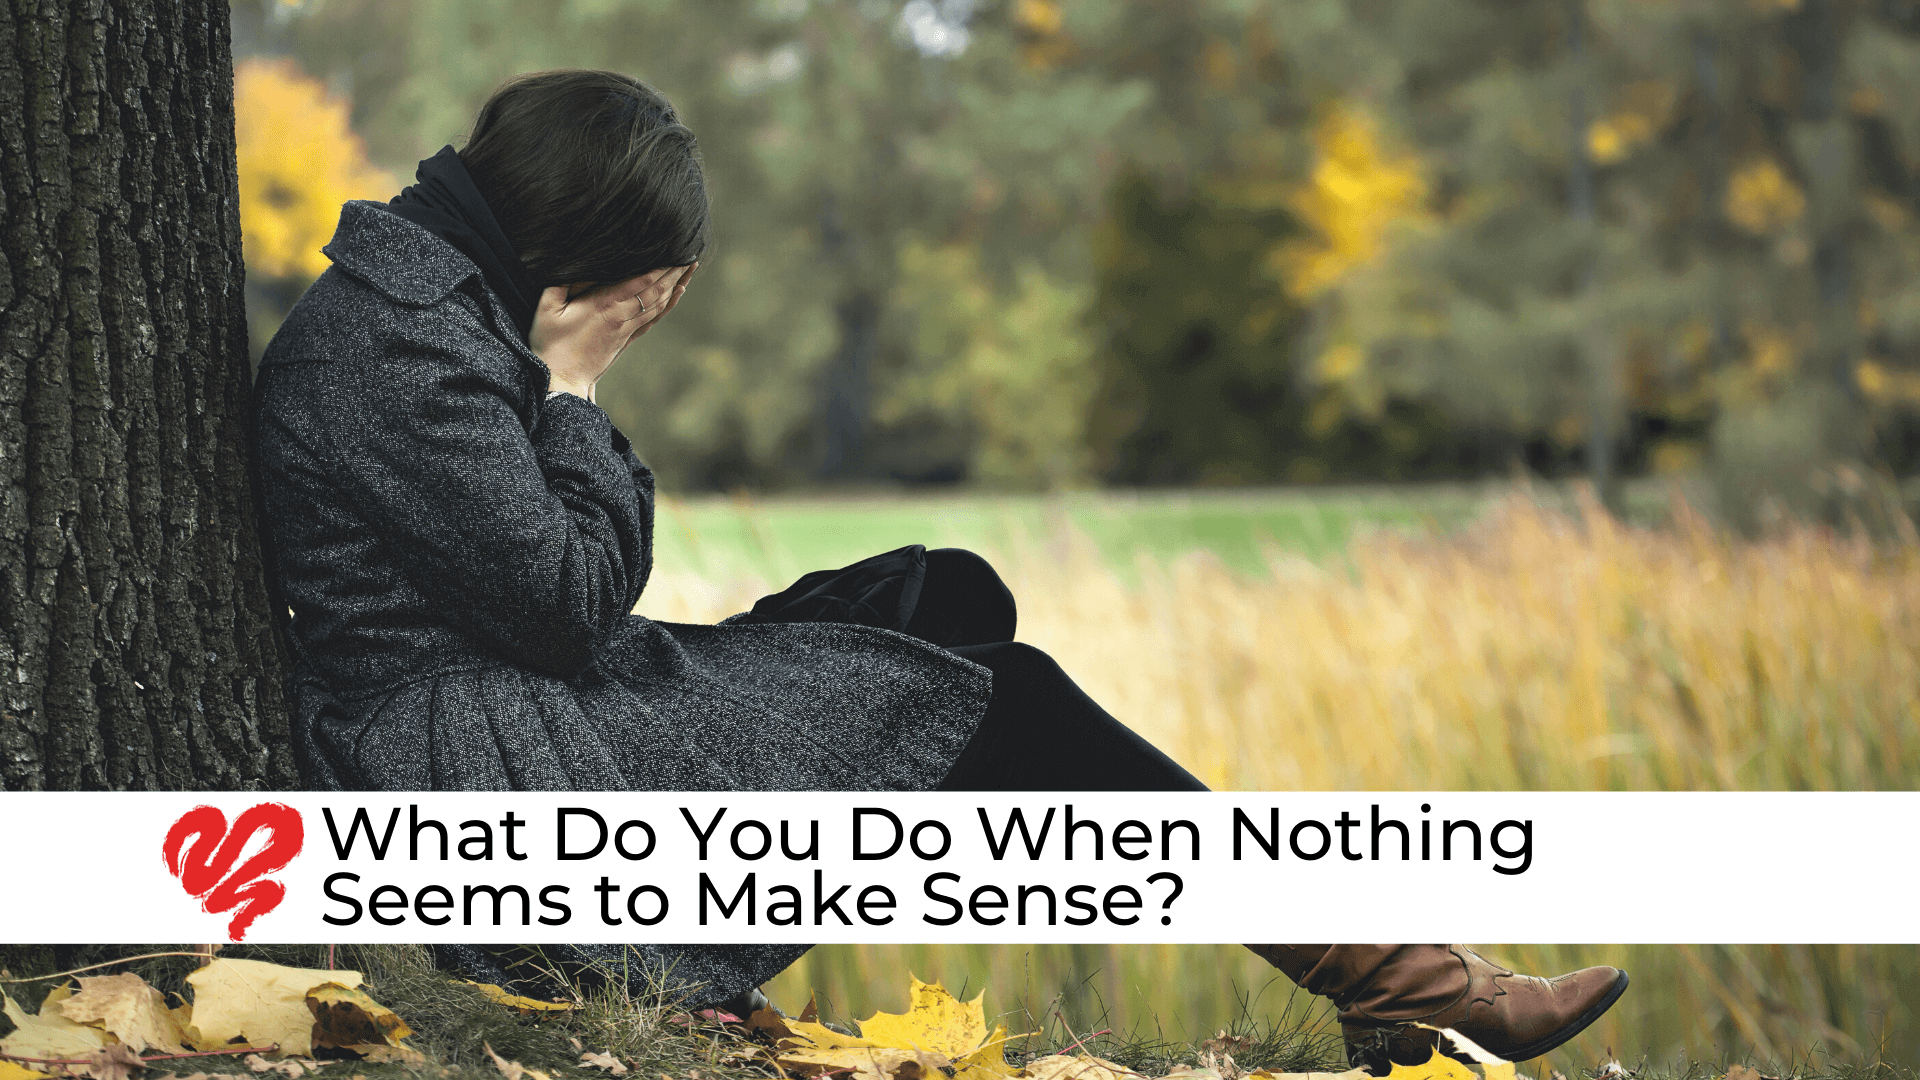 What Do You Do When Nothing Seems to Make Sense?